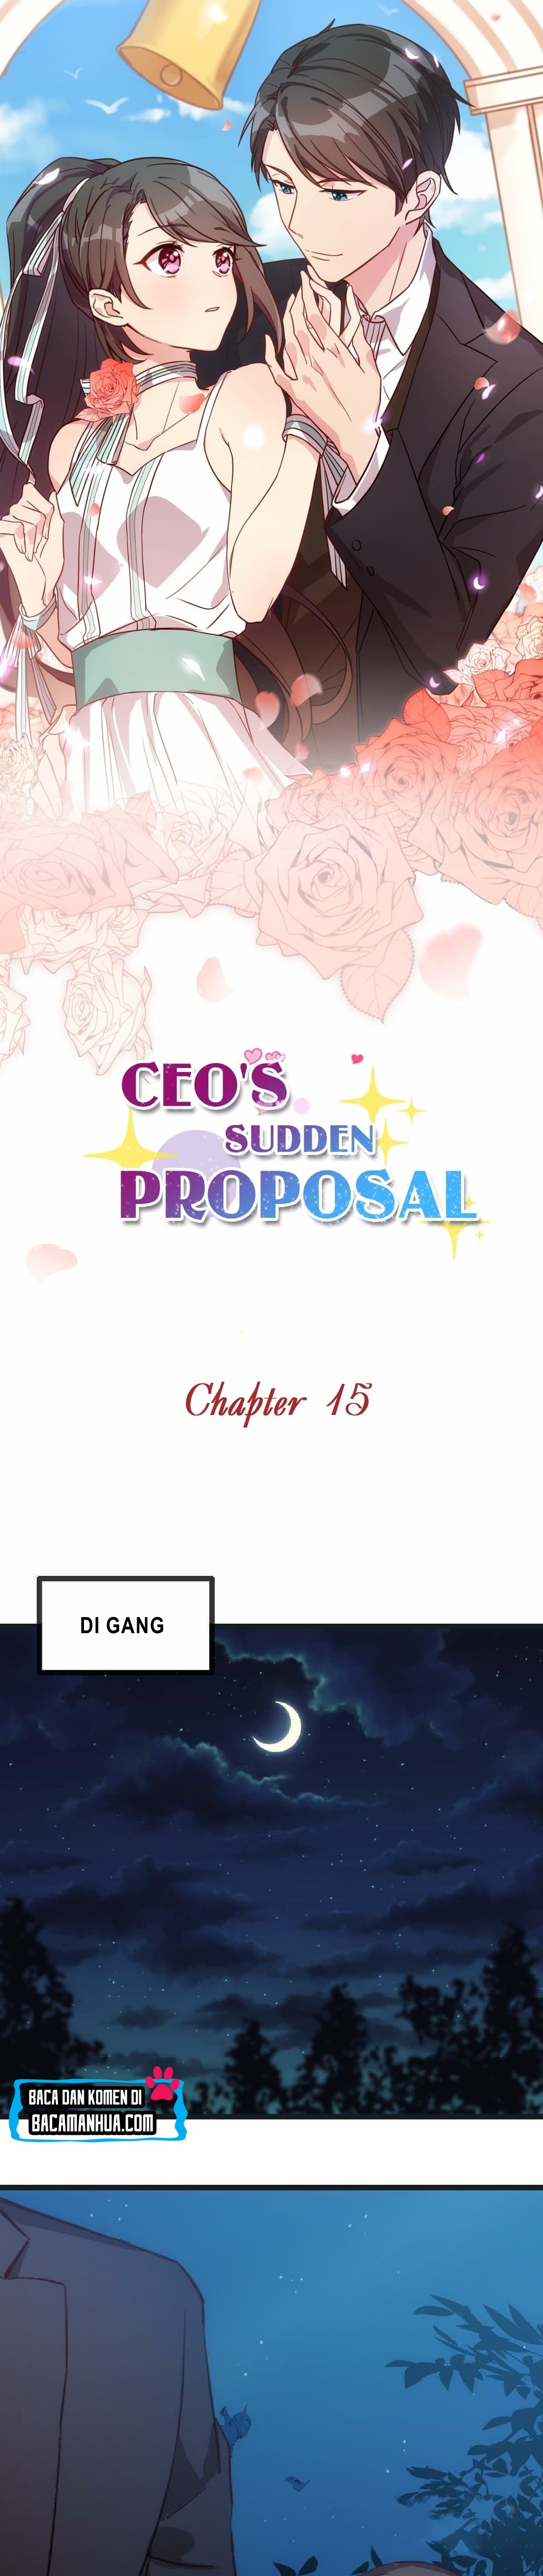 CEO’s Sudden Proposal Chapter 15